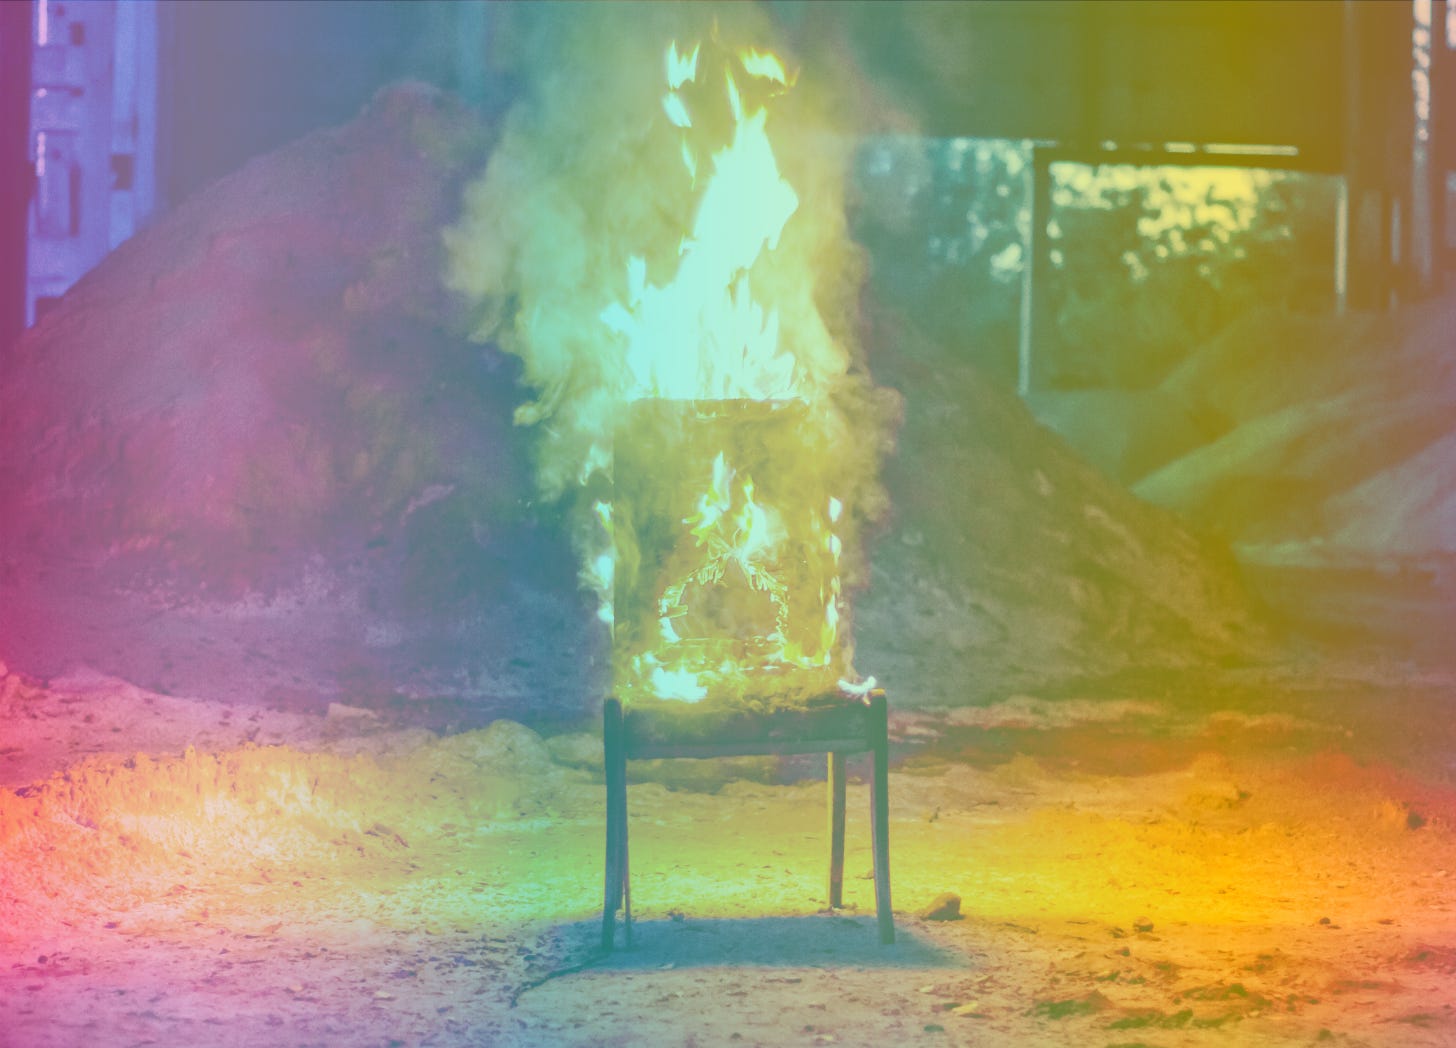 A rainbow-filtered image of a chair in flames